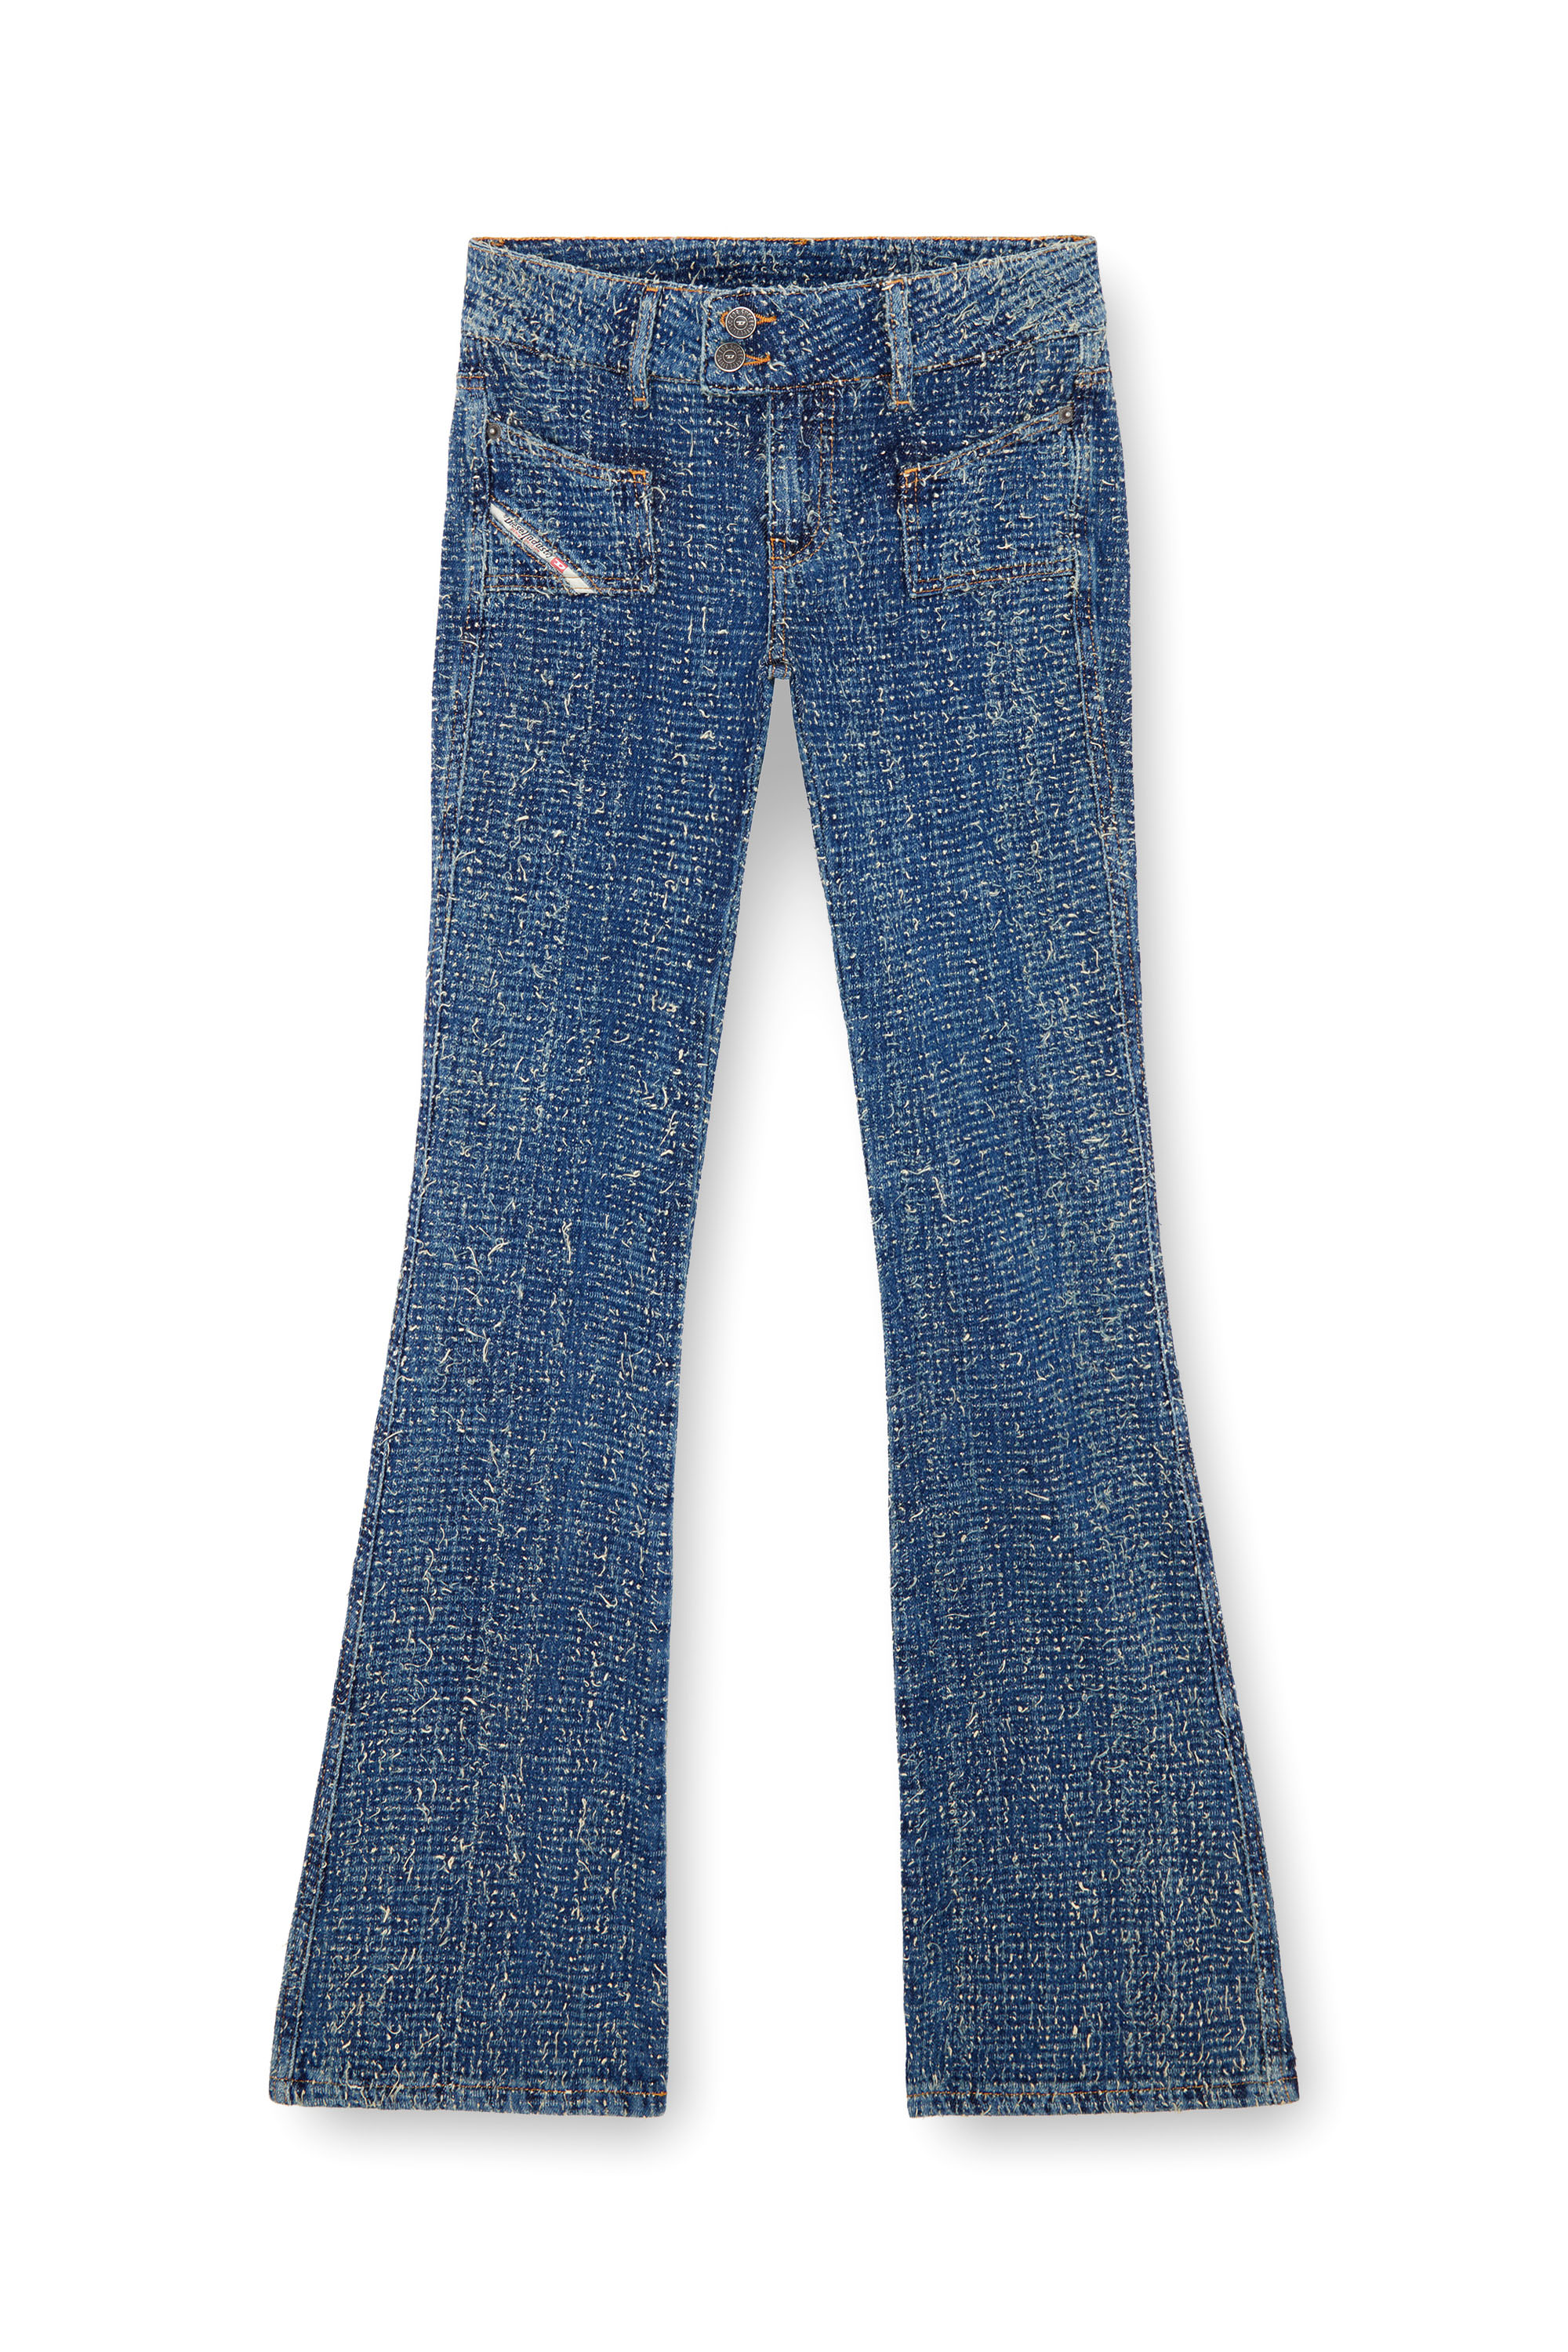 Diesel - Bootcut and Flare Jeans D-Ebush 0PGAH, Mujer Bootcut y Flare Jeans - D-Ebush in Azul marino - Image 3